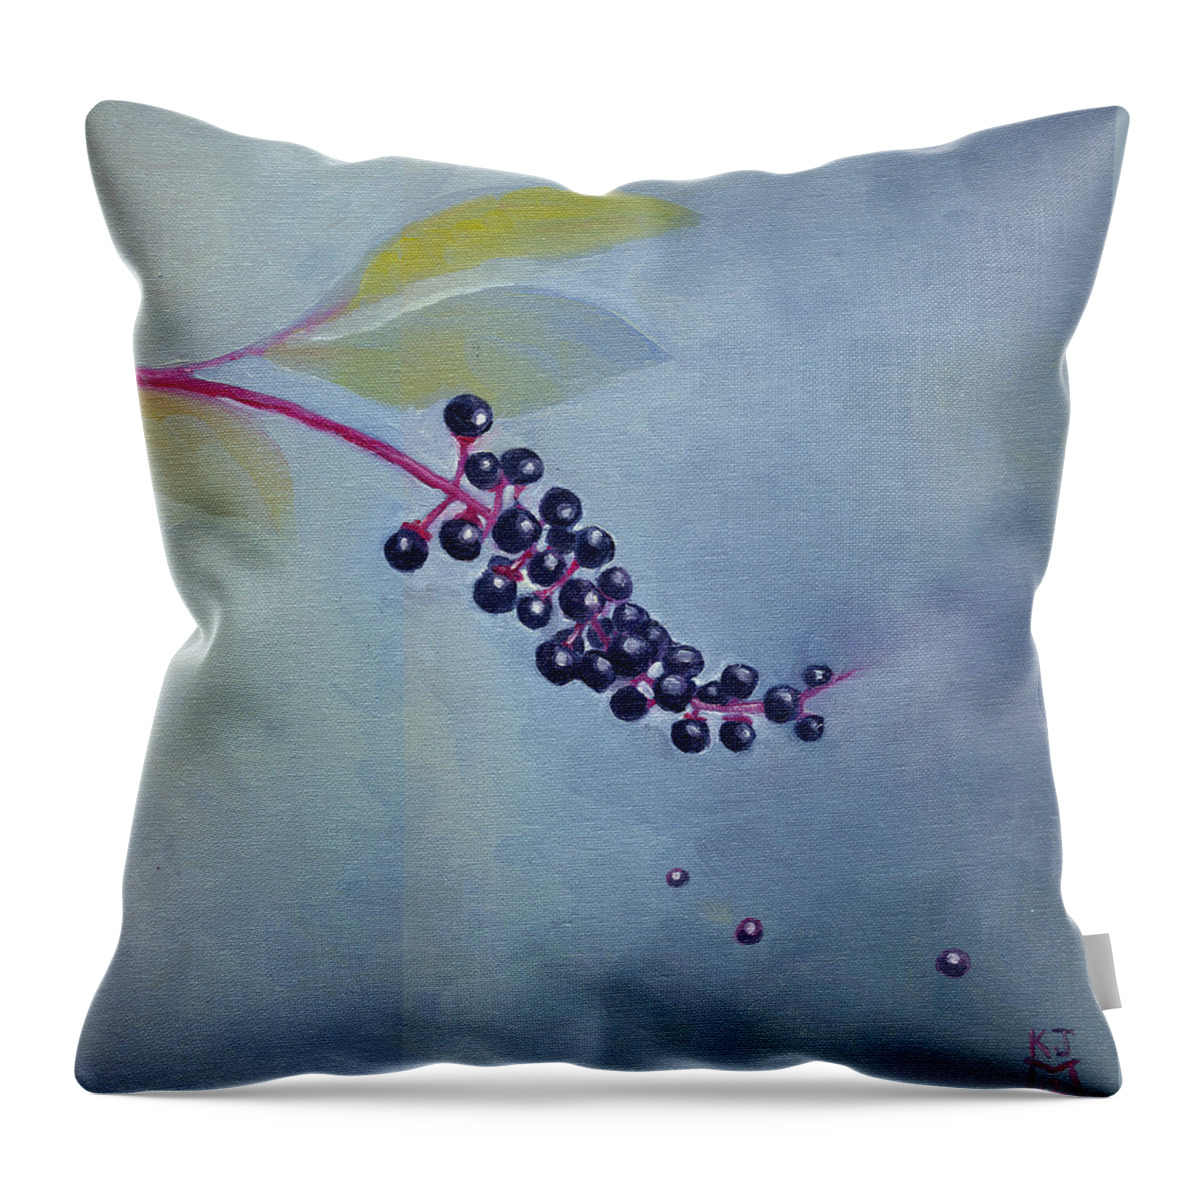 Pokeberries Throw Pillow featuring the painting Pokeberries by Katherine Miller